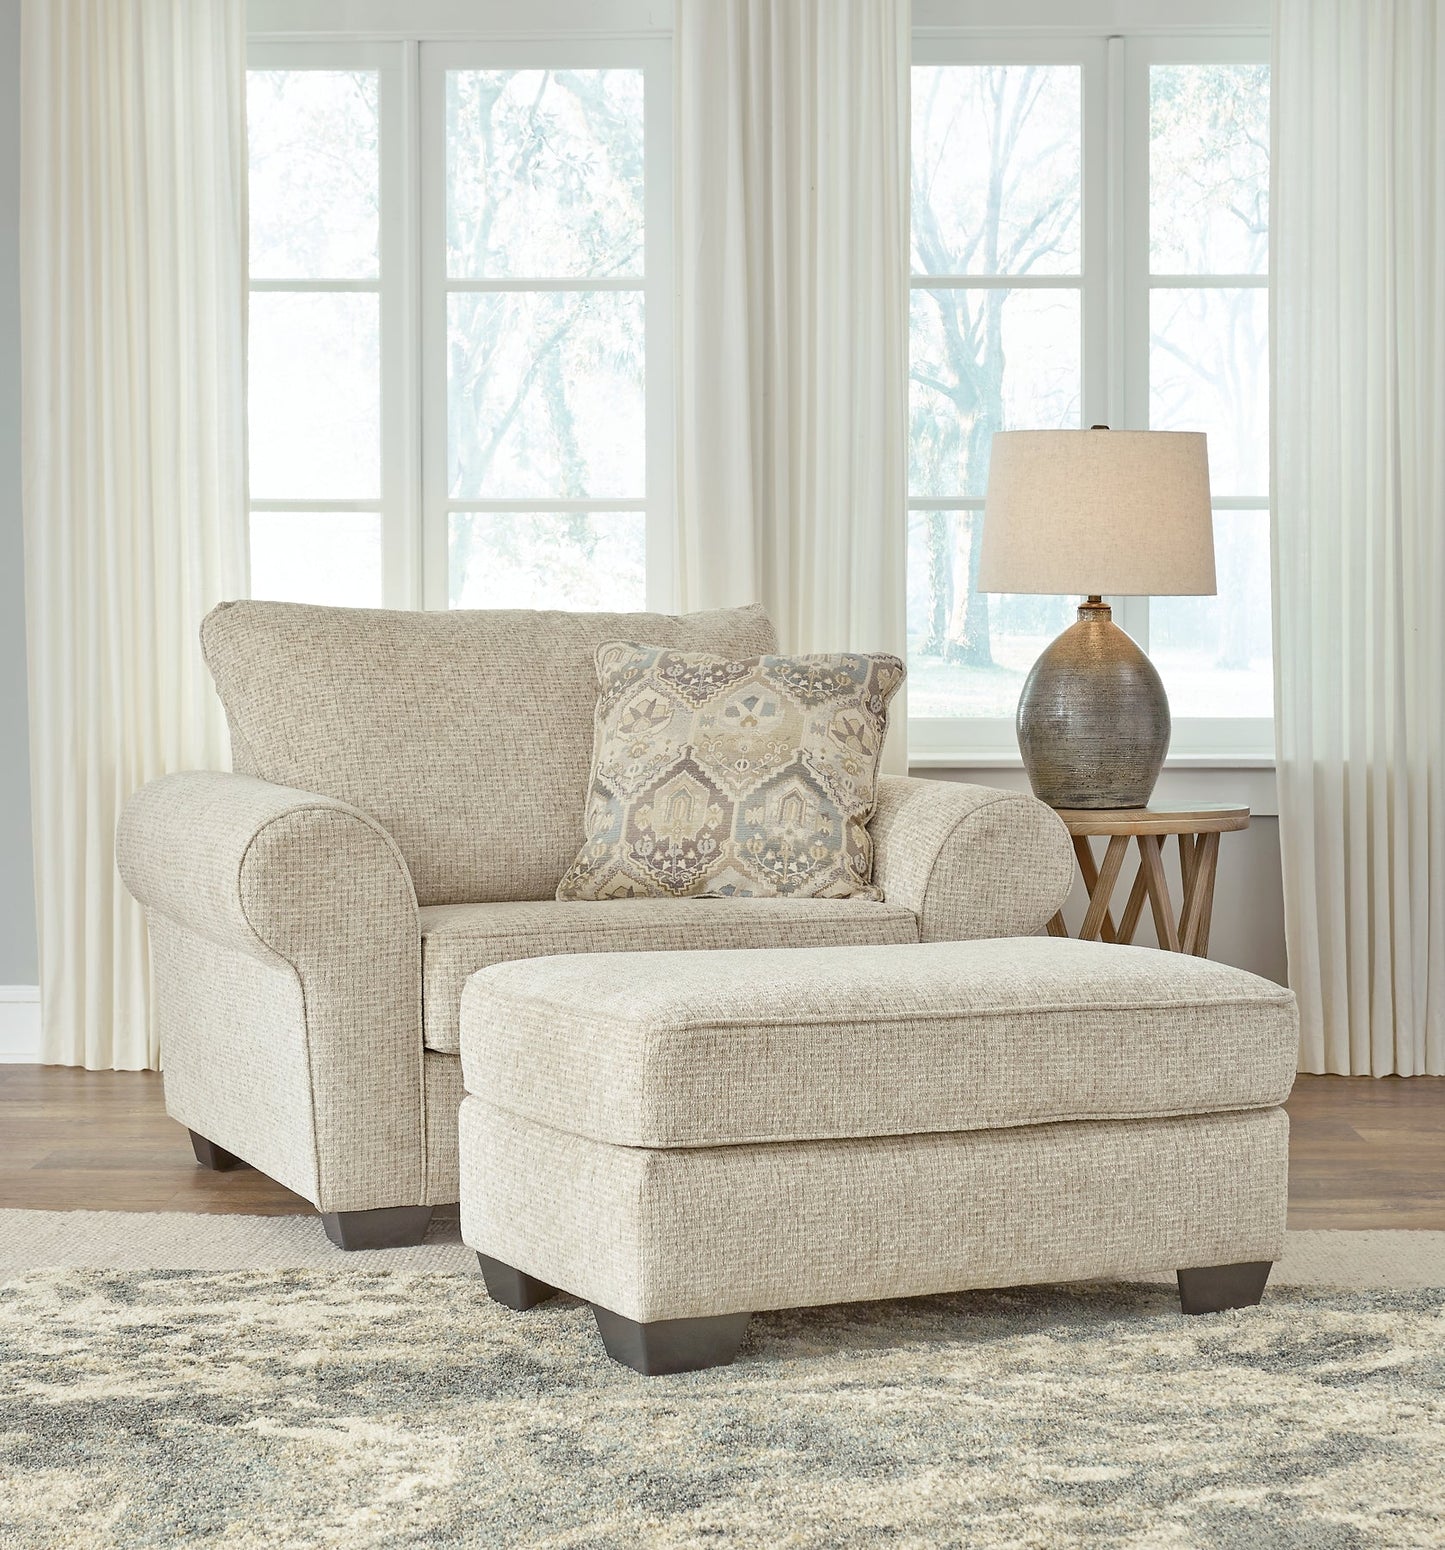 Haisley Sofa, Loveseat, Chair and Ottoman Rent Wise Rent To Own Jacksonville, Florida